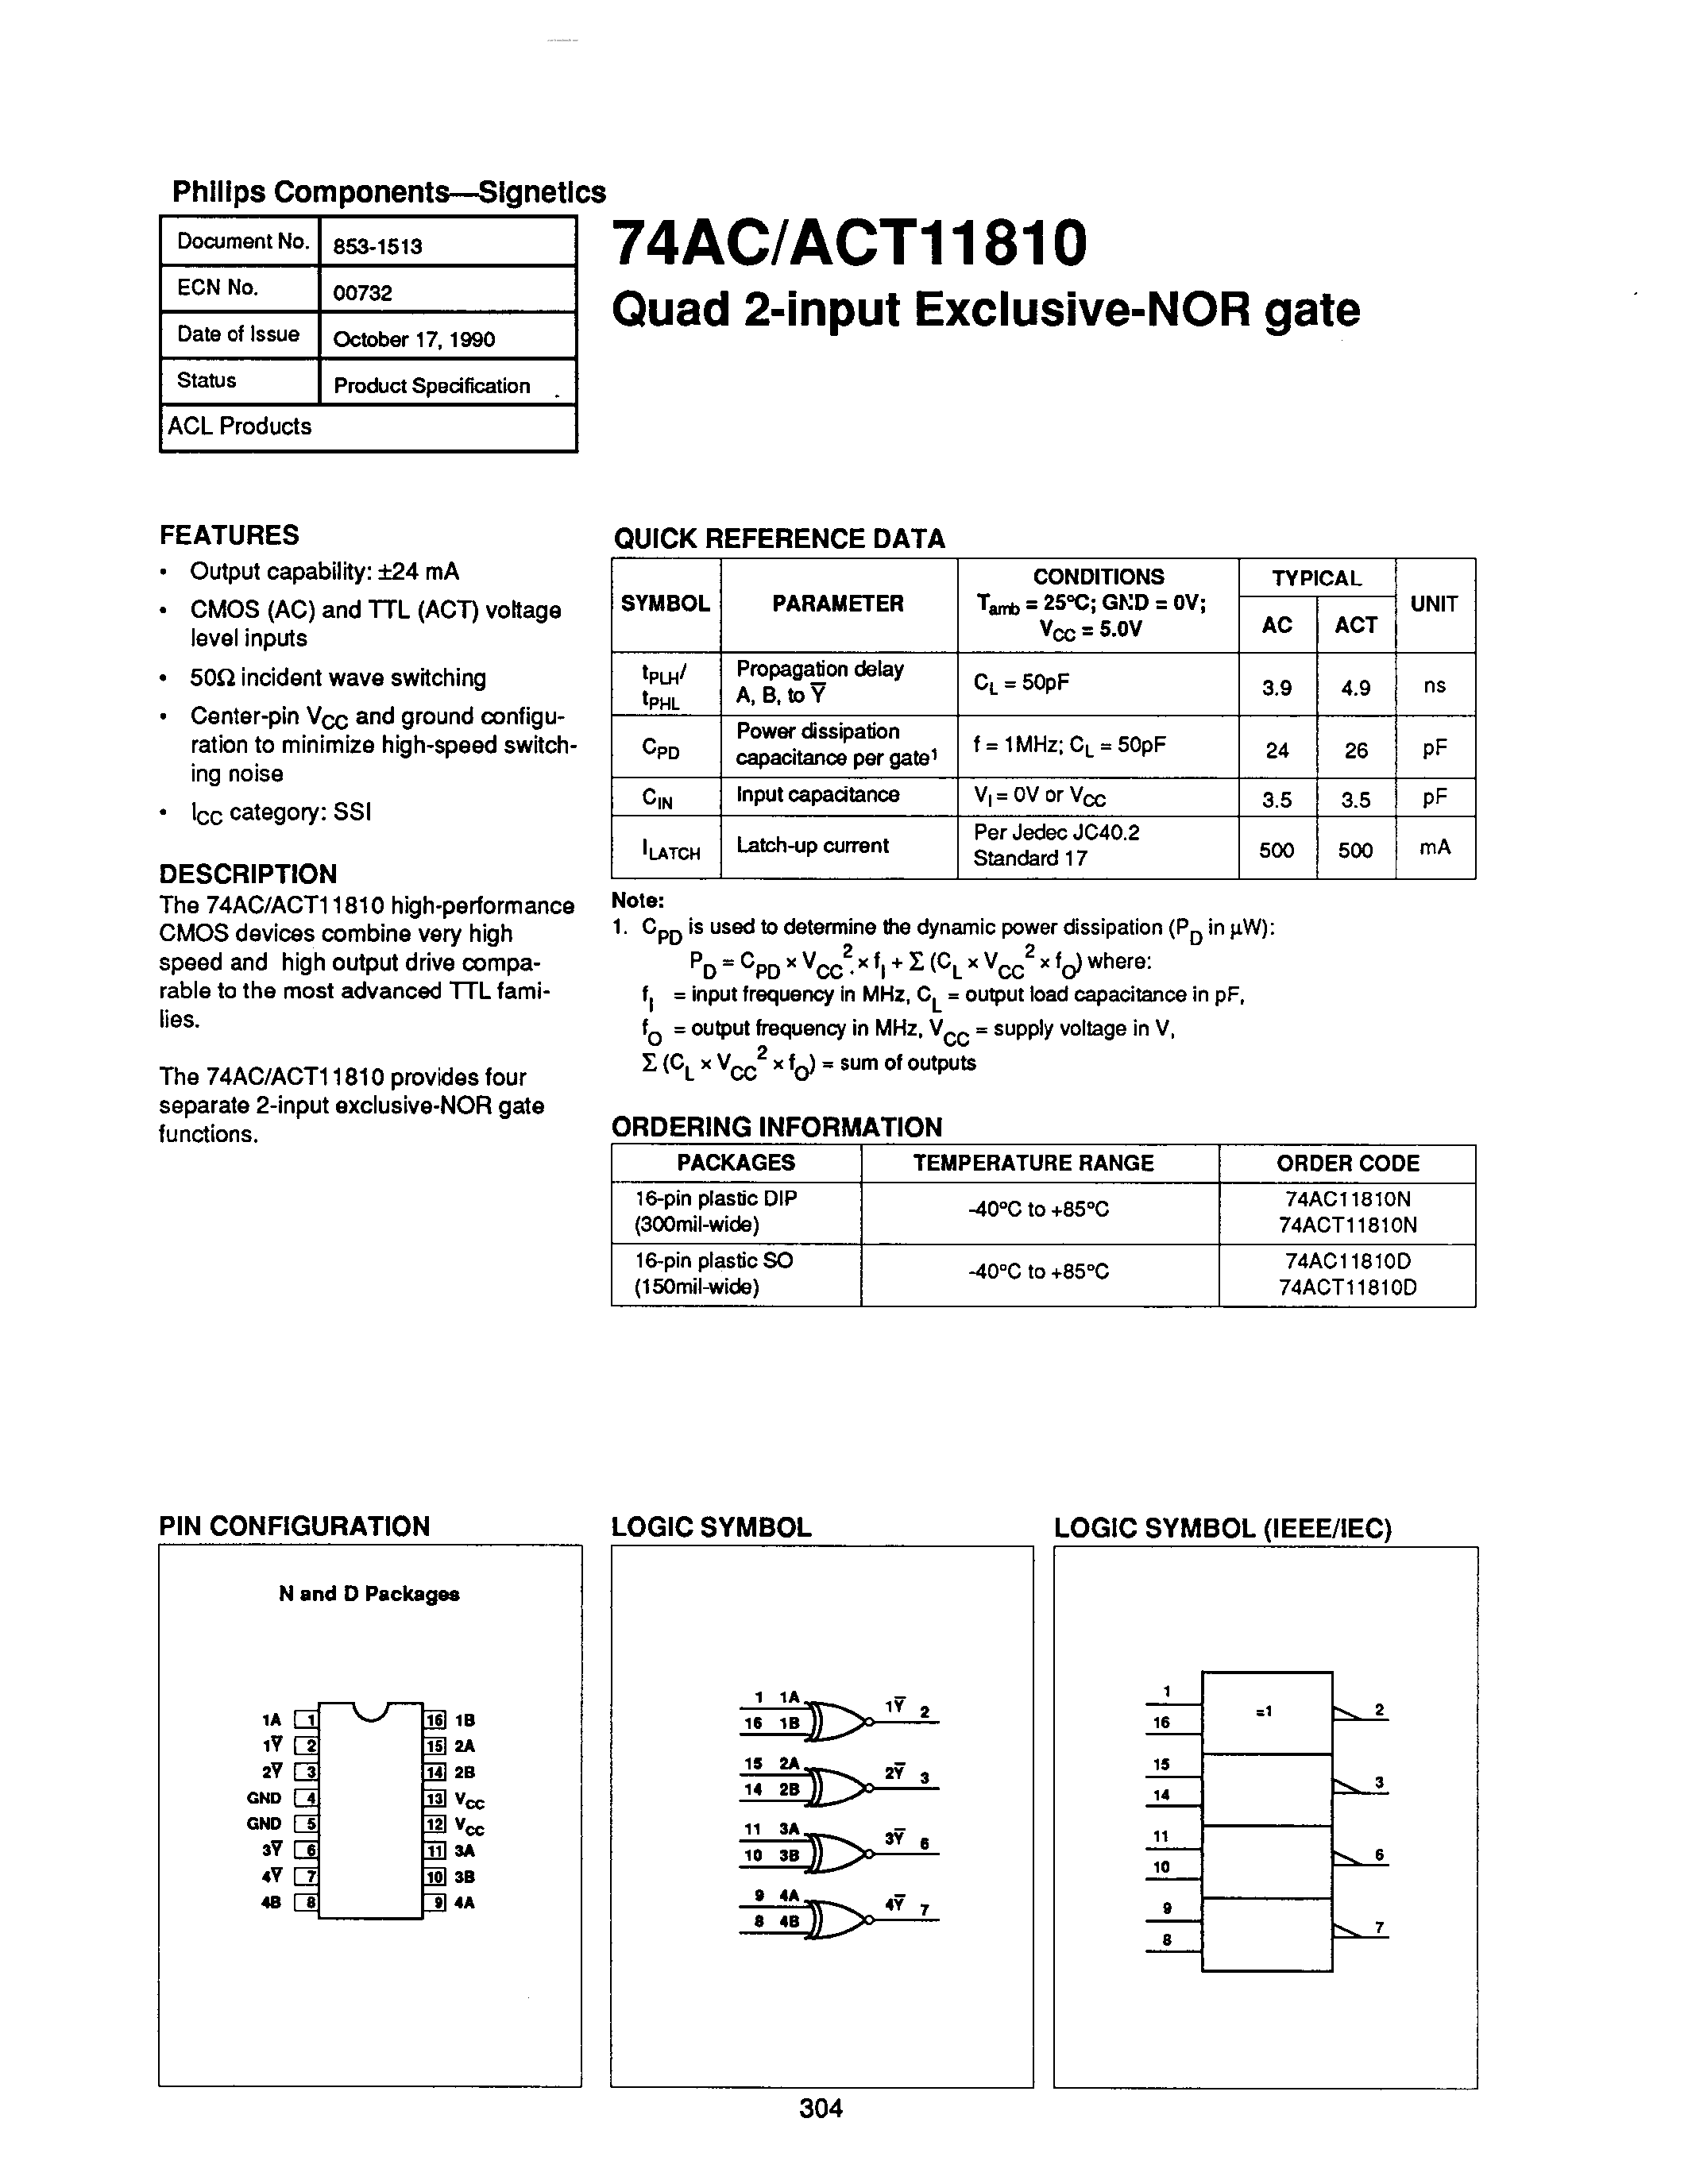 Datasheet 74AC11810 - QUAD 2-INPUT EXCLUSIVE-NOR GATE page 1